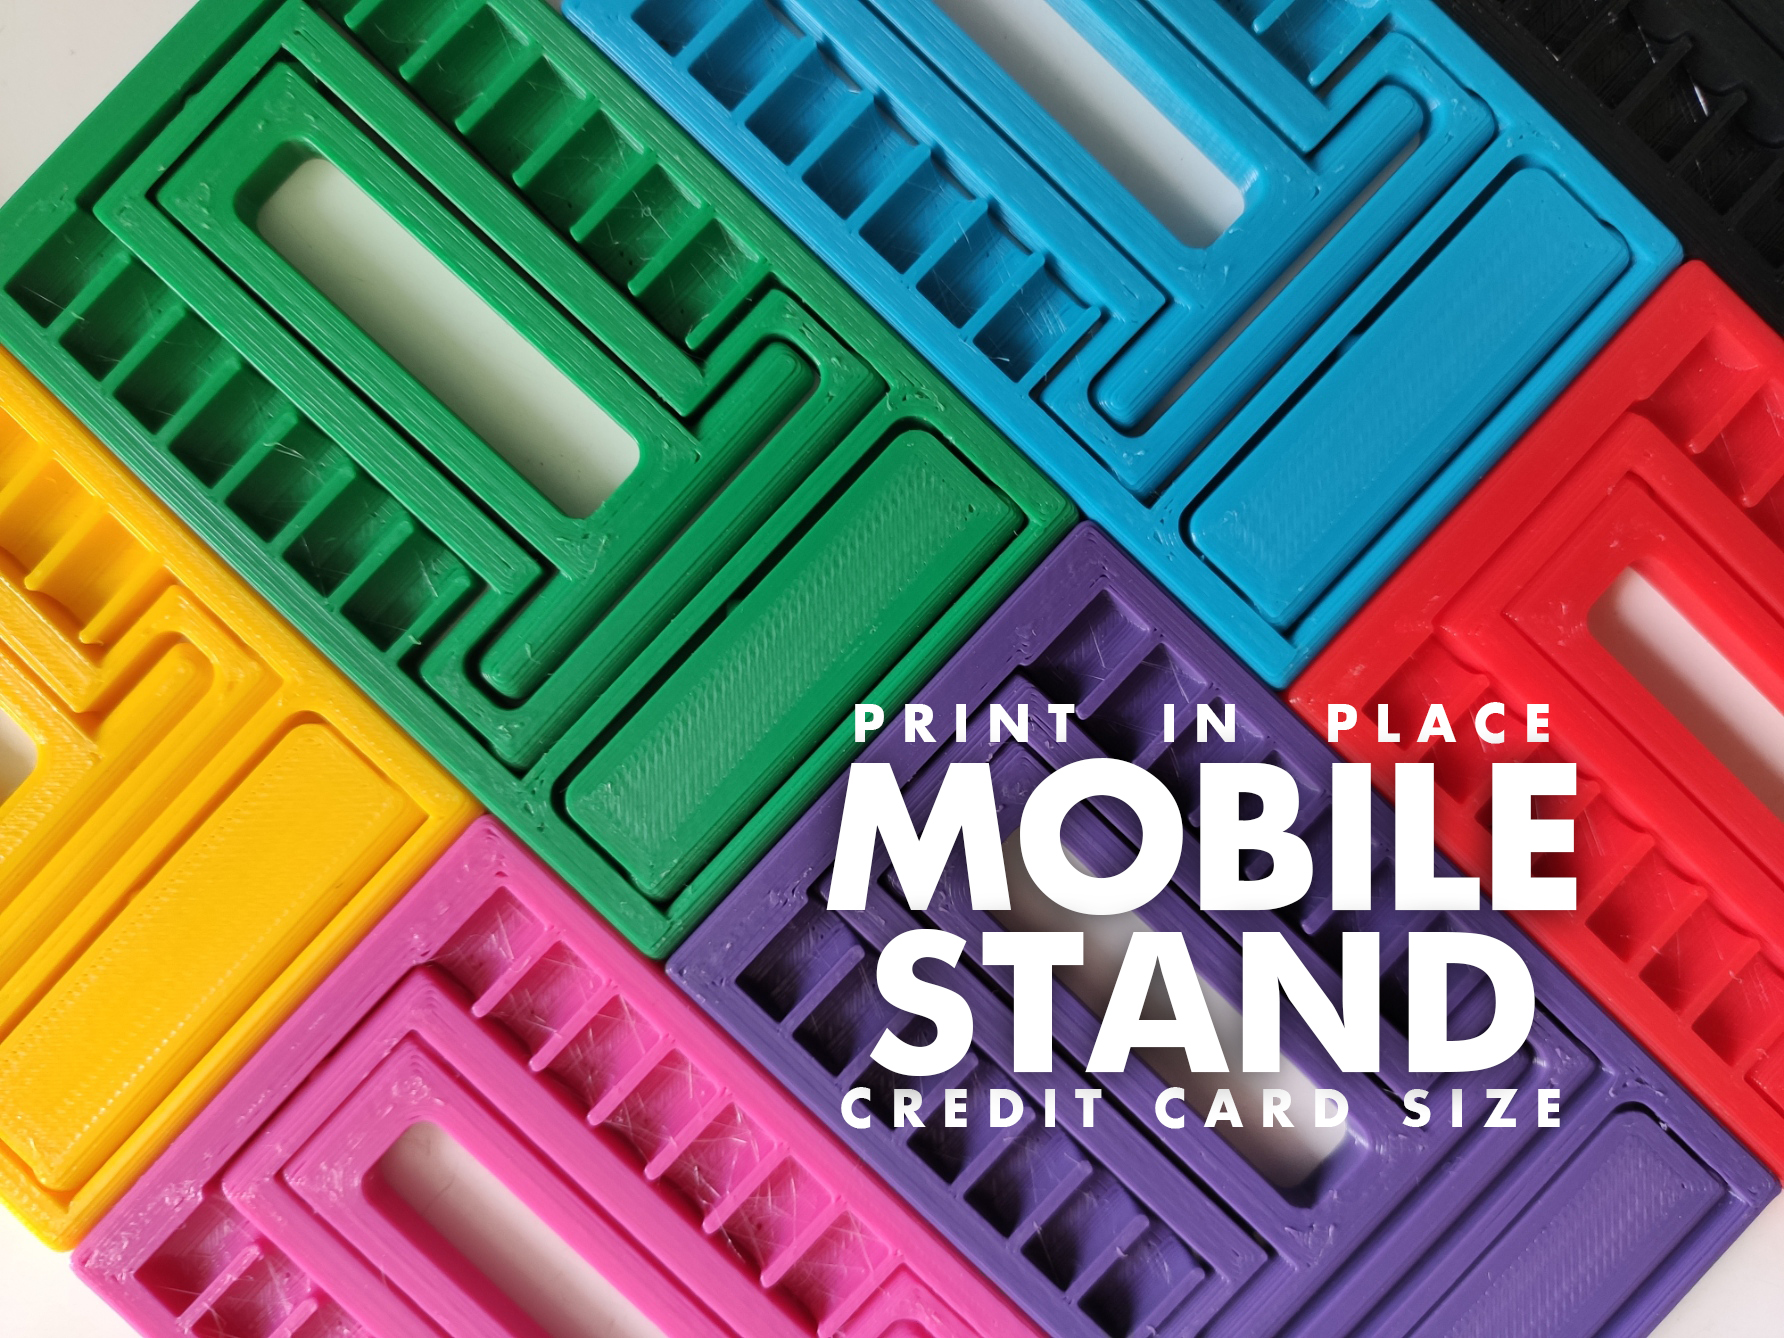 Print in Place : Mobile Stand (Credit Card Size)